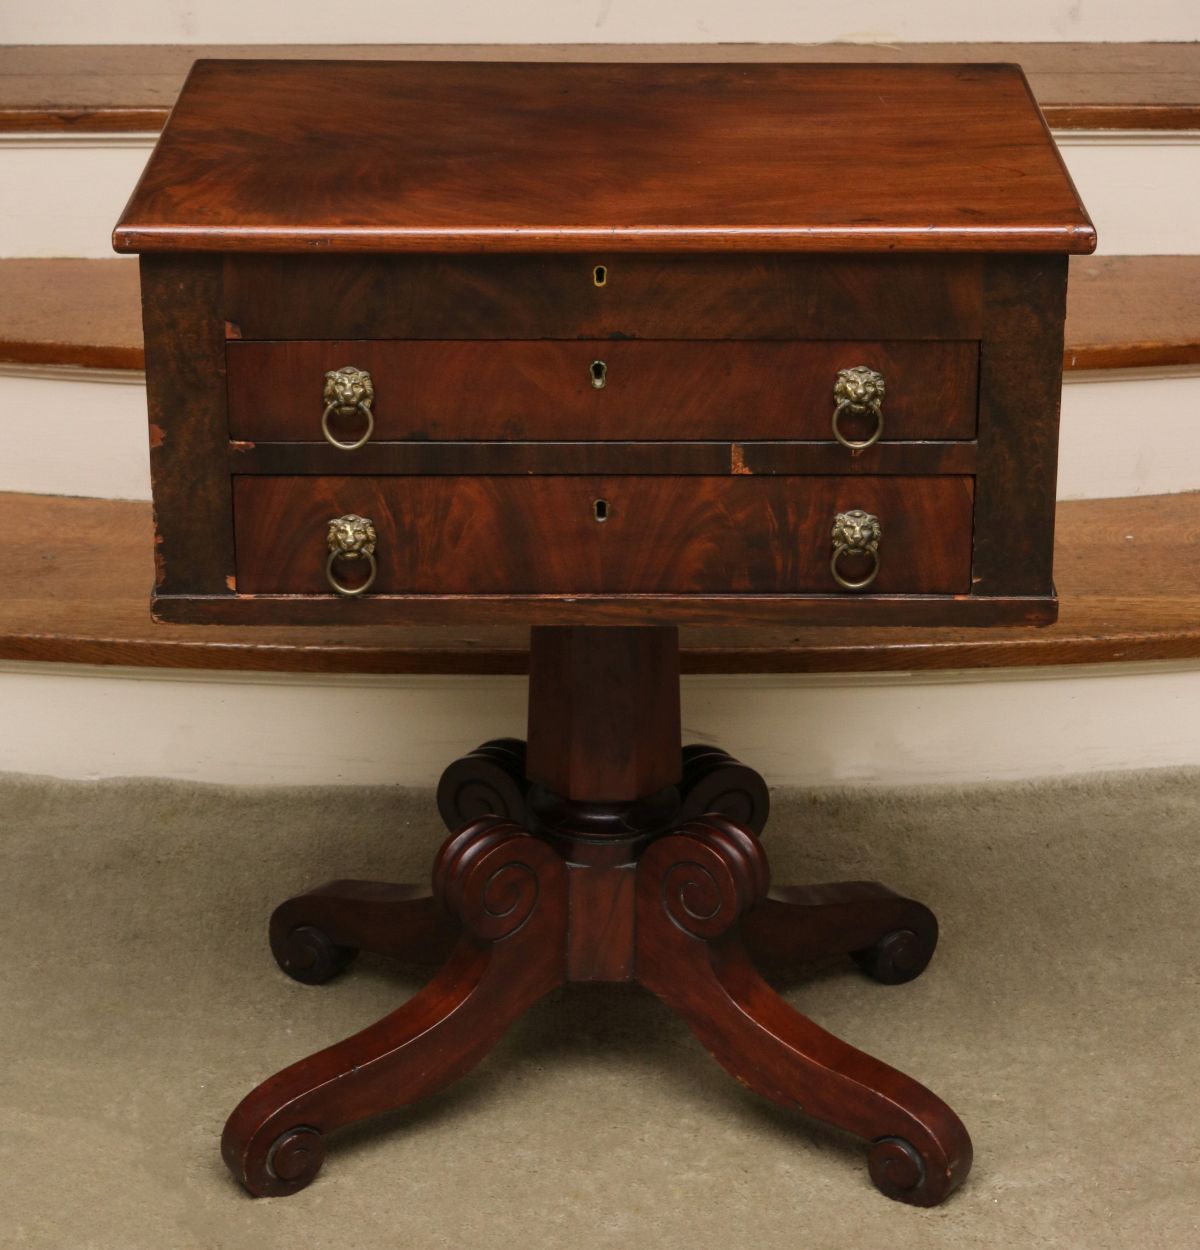 A REGENCY MAHOGANY SEWING STAND WORK TABLE